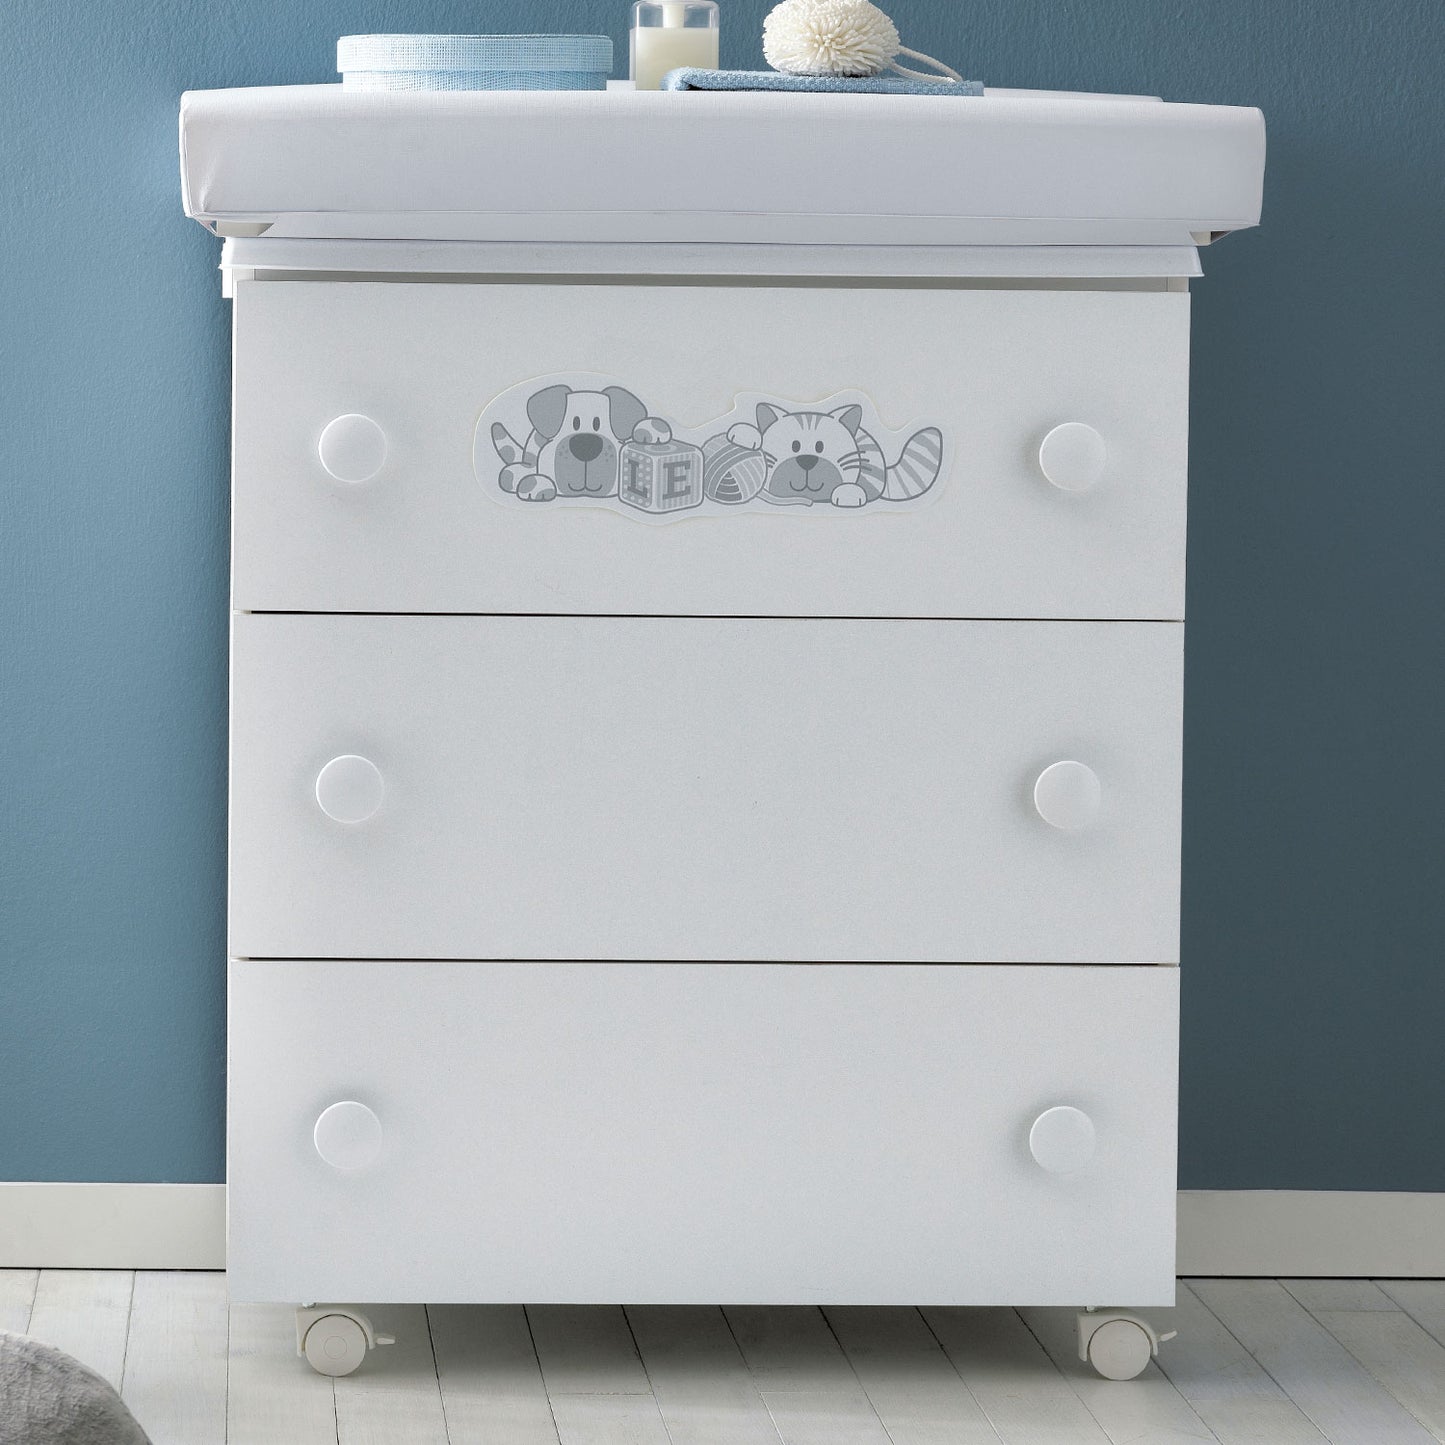 Leo Chest of Drawers with Baby Bath Changing Table by Pali